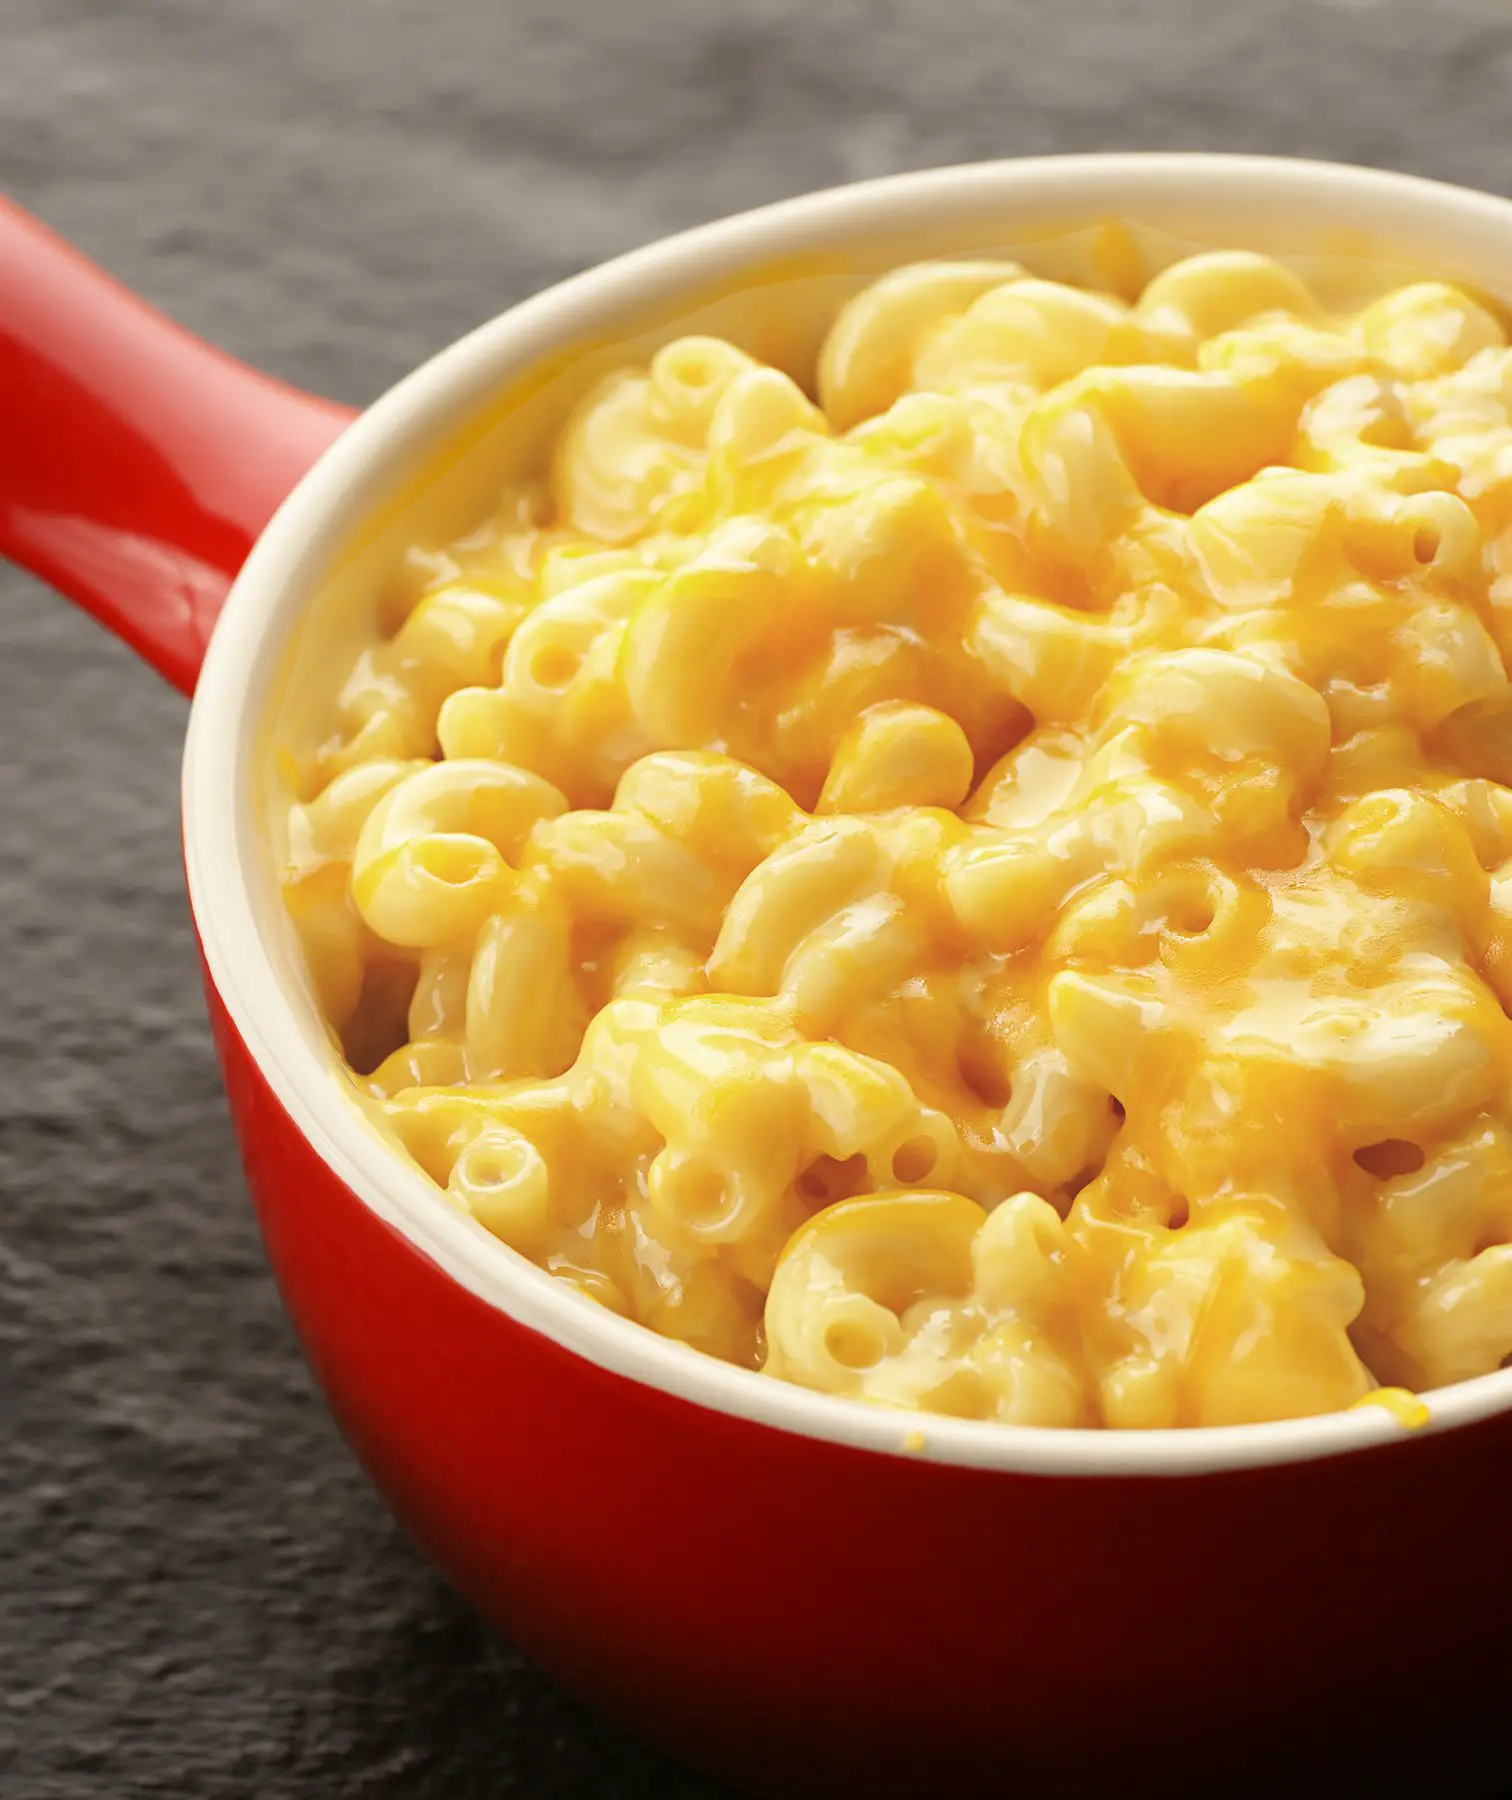 This Stovetop Mac and Cheese Is Ready in Just 3 Minutes